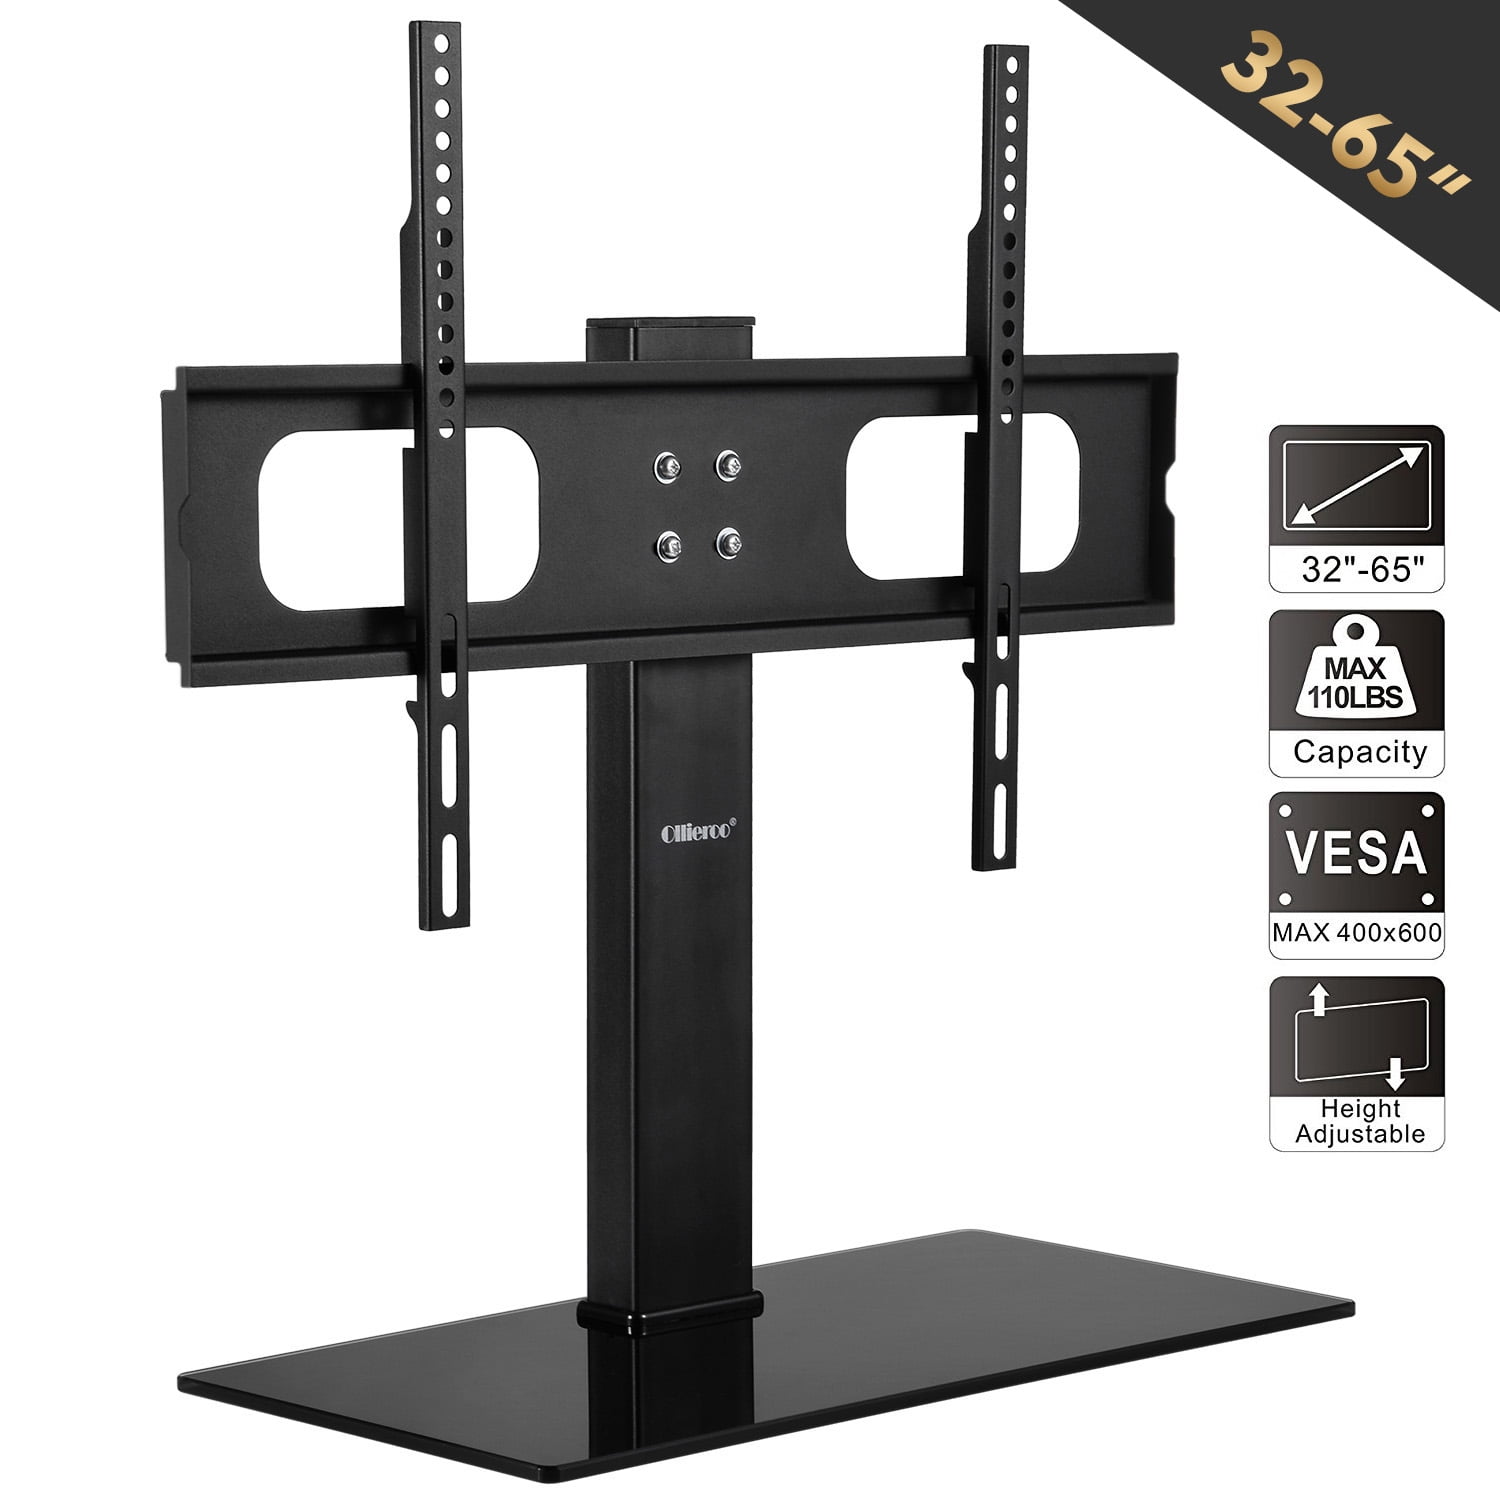 Universal TV Stand/Base Tabletop TV Stand with Wall Mount for 32 to 65 inch 4 Level Height Adjustable Holds up to 110lbs Screens Heavy Duty Tempered Glass Base HT03B-002 